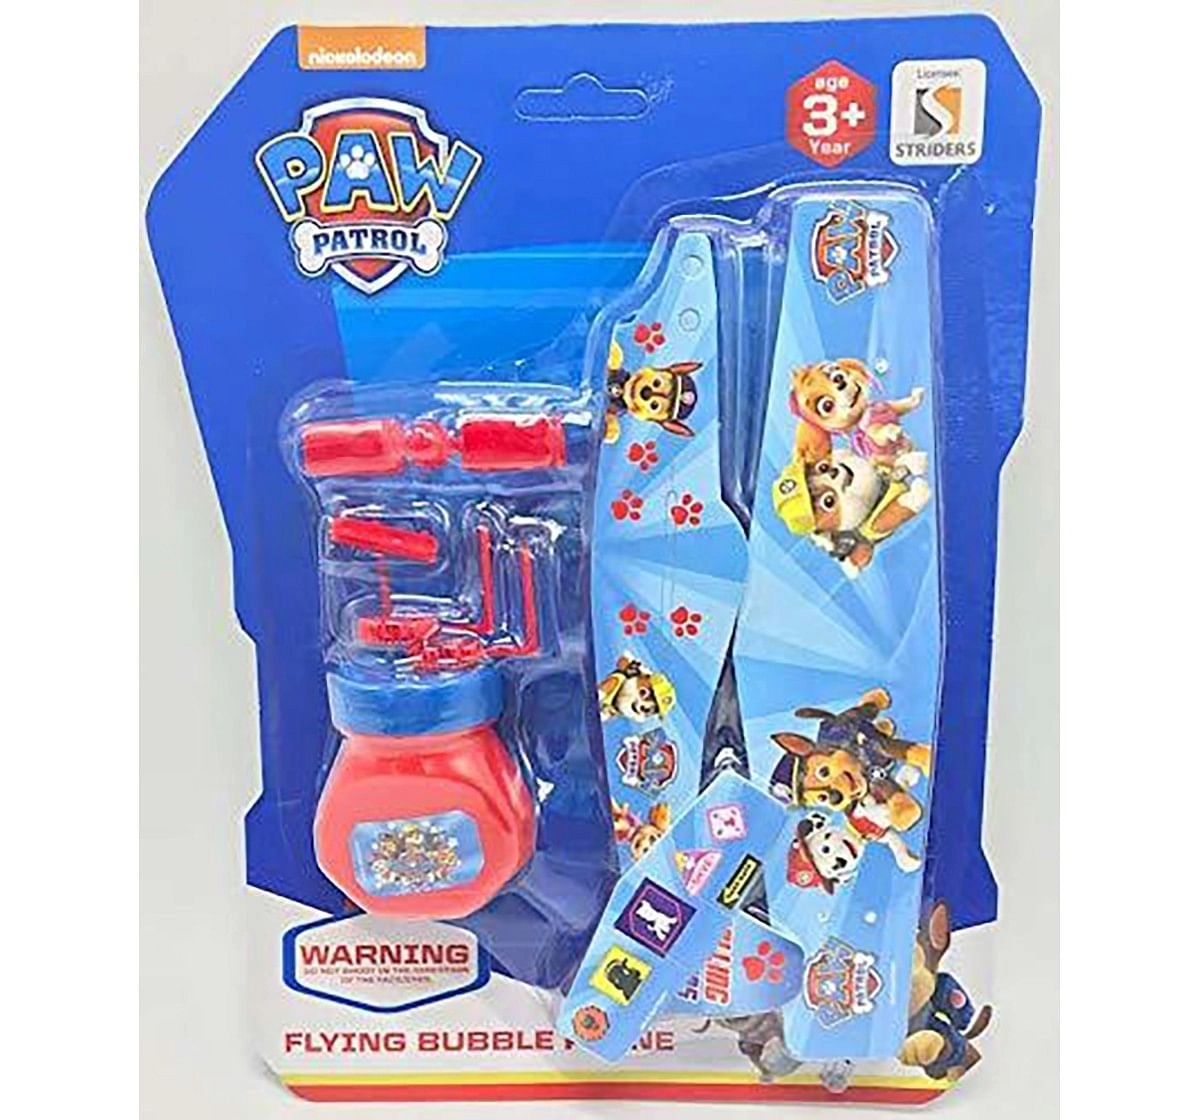 Paw Patrol Flying Bubbles Plane Toys for Kids age 3Y+ 